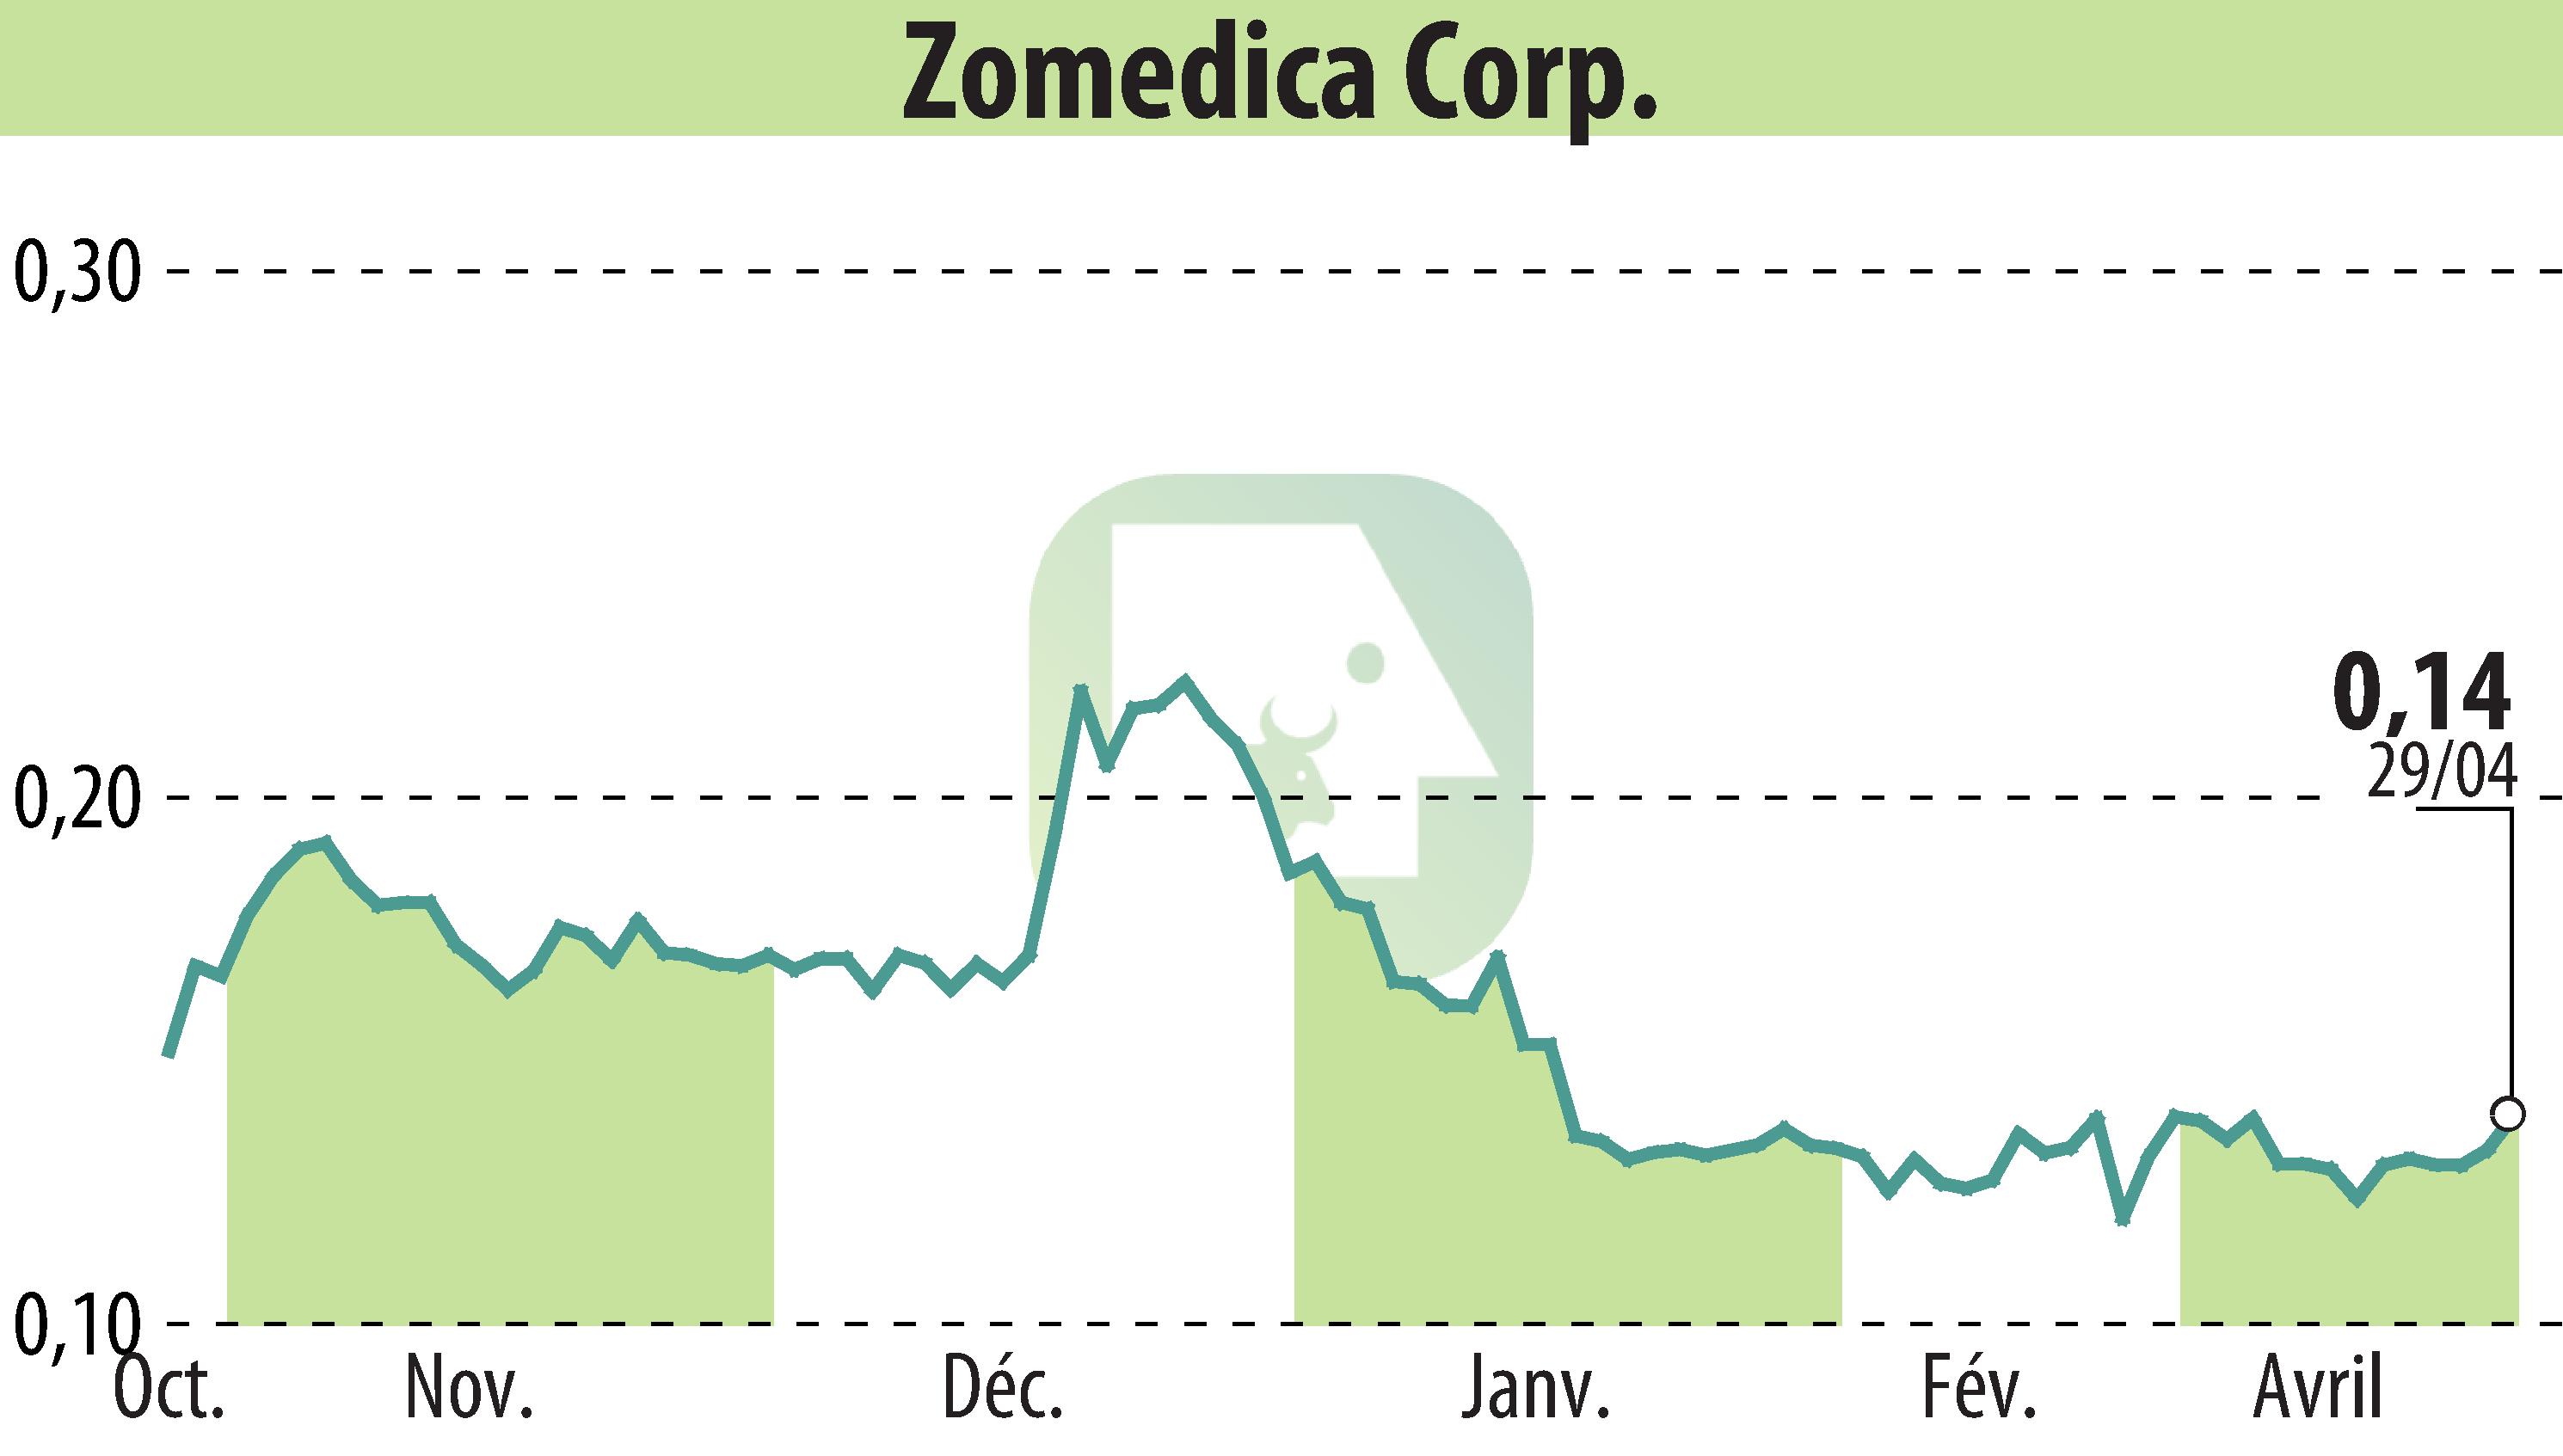 Stock price chart of Zomedica Corp. (EBR:ZOM) showing fluctuations.